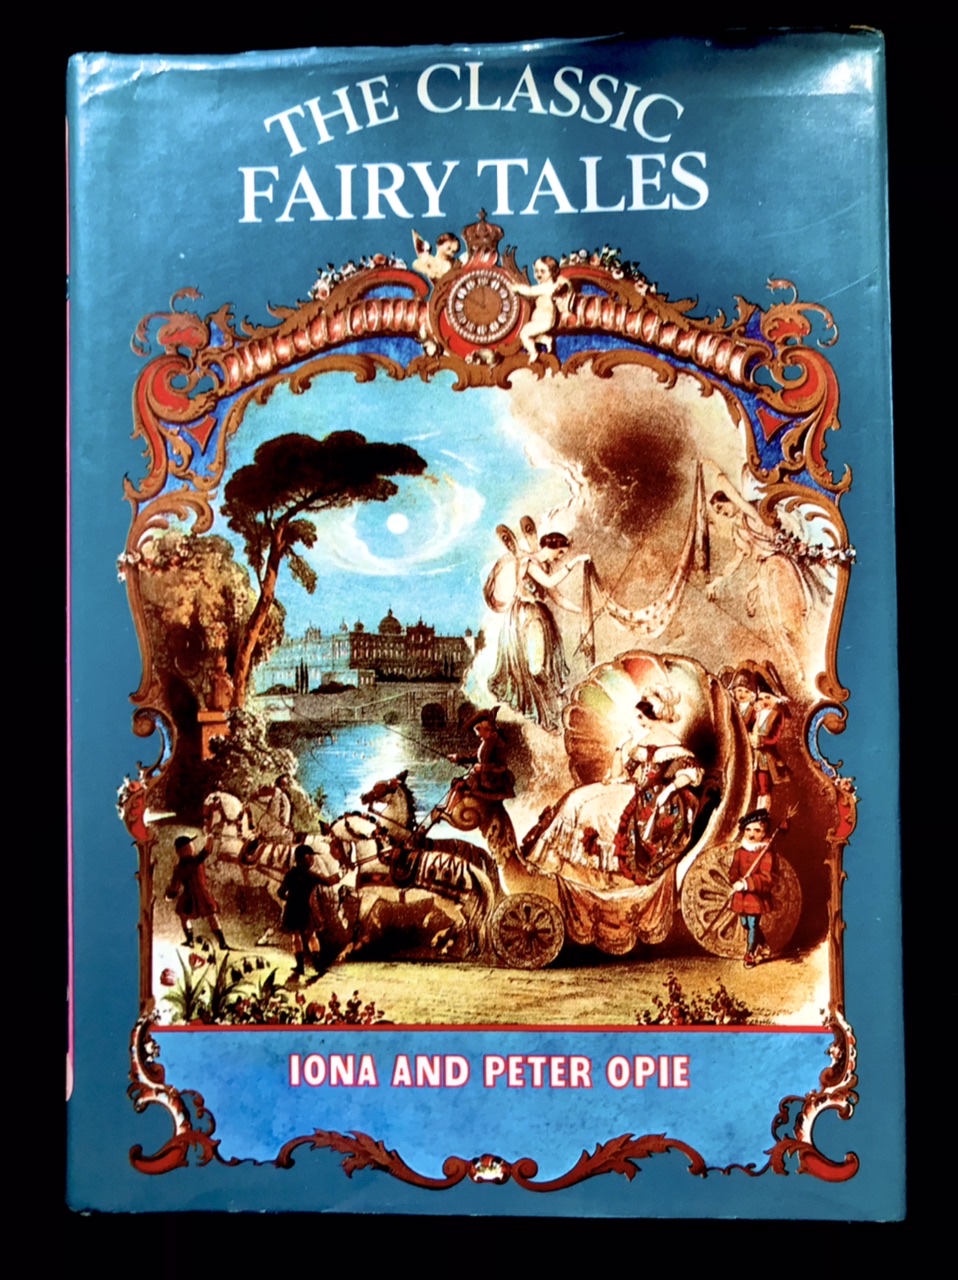 The Classic Fairy Tales by Iona & Peter Opie